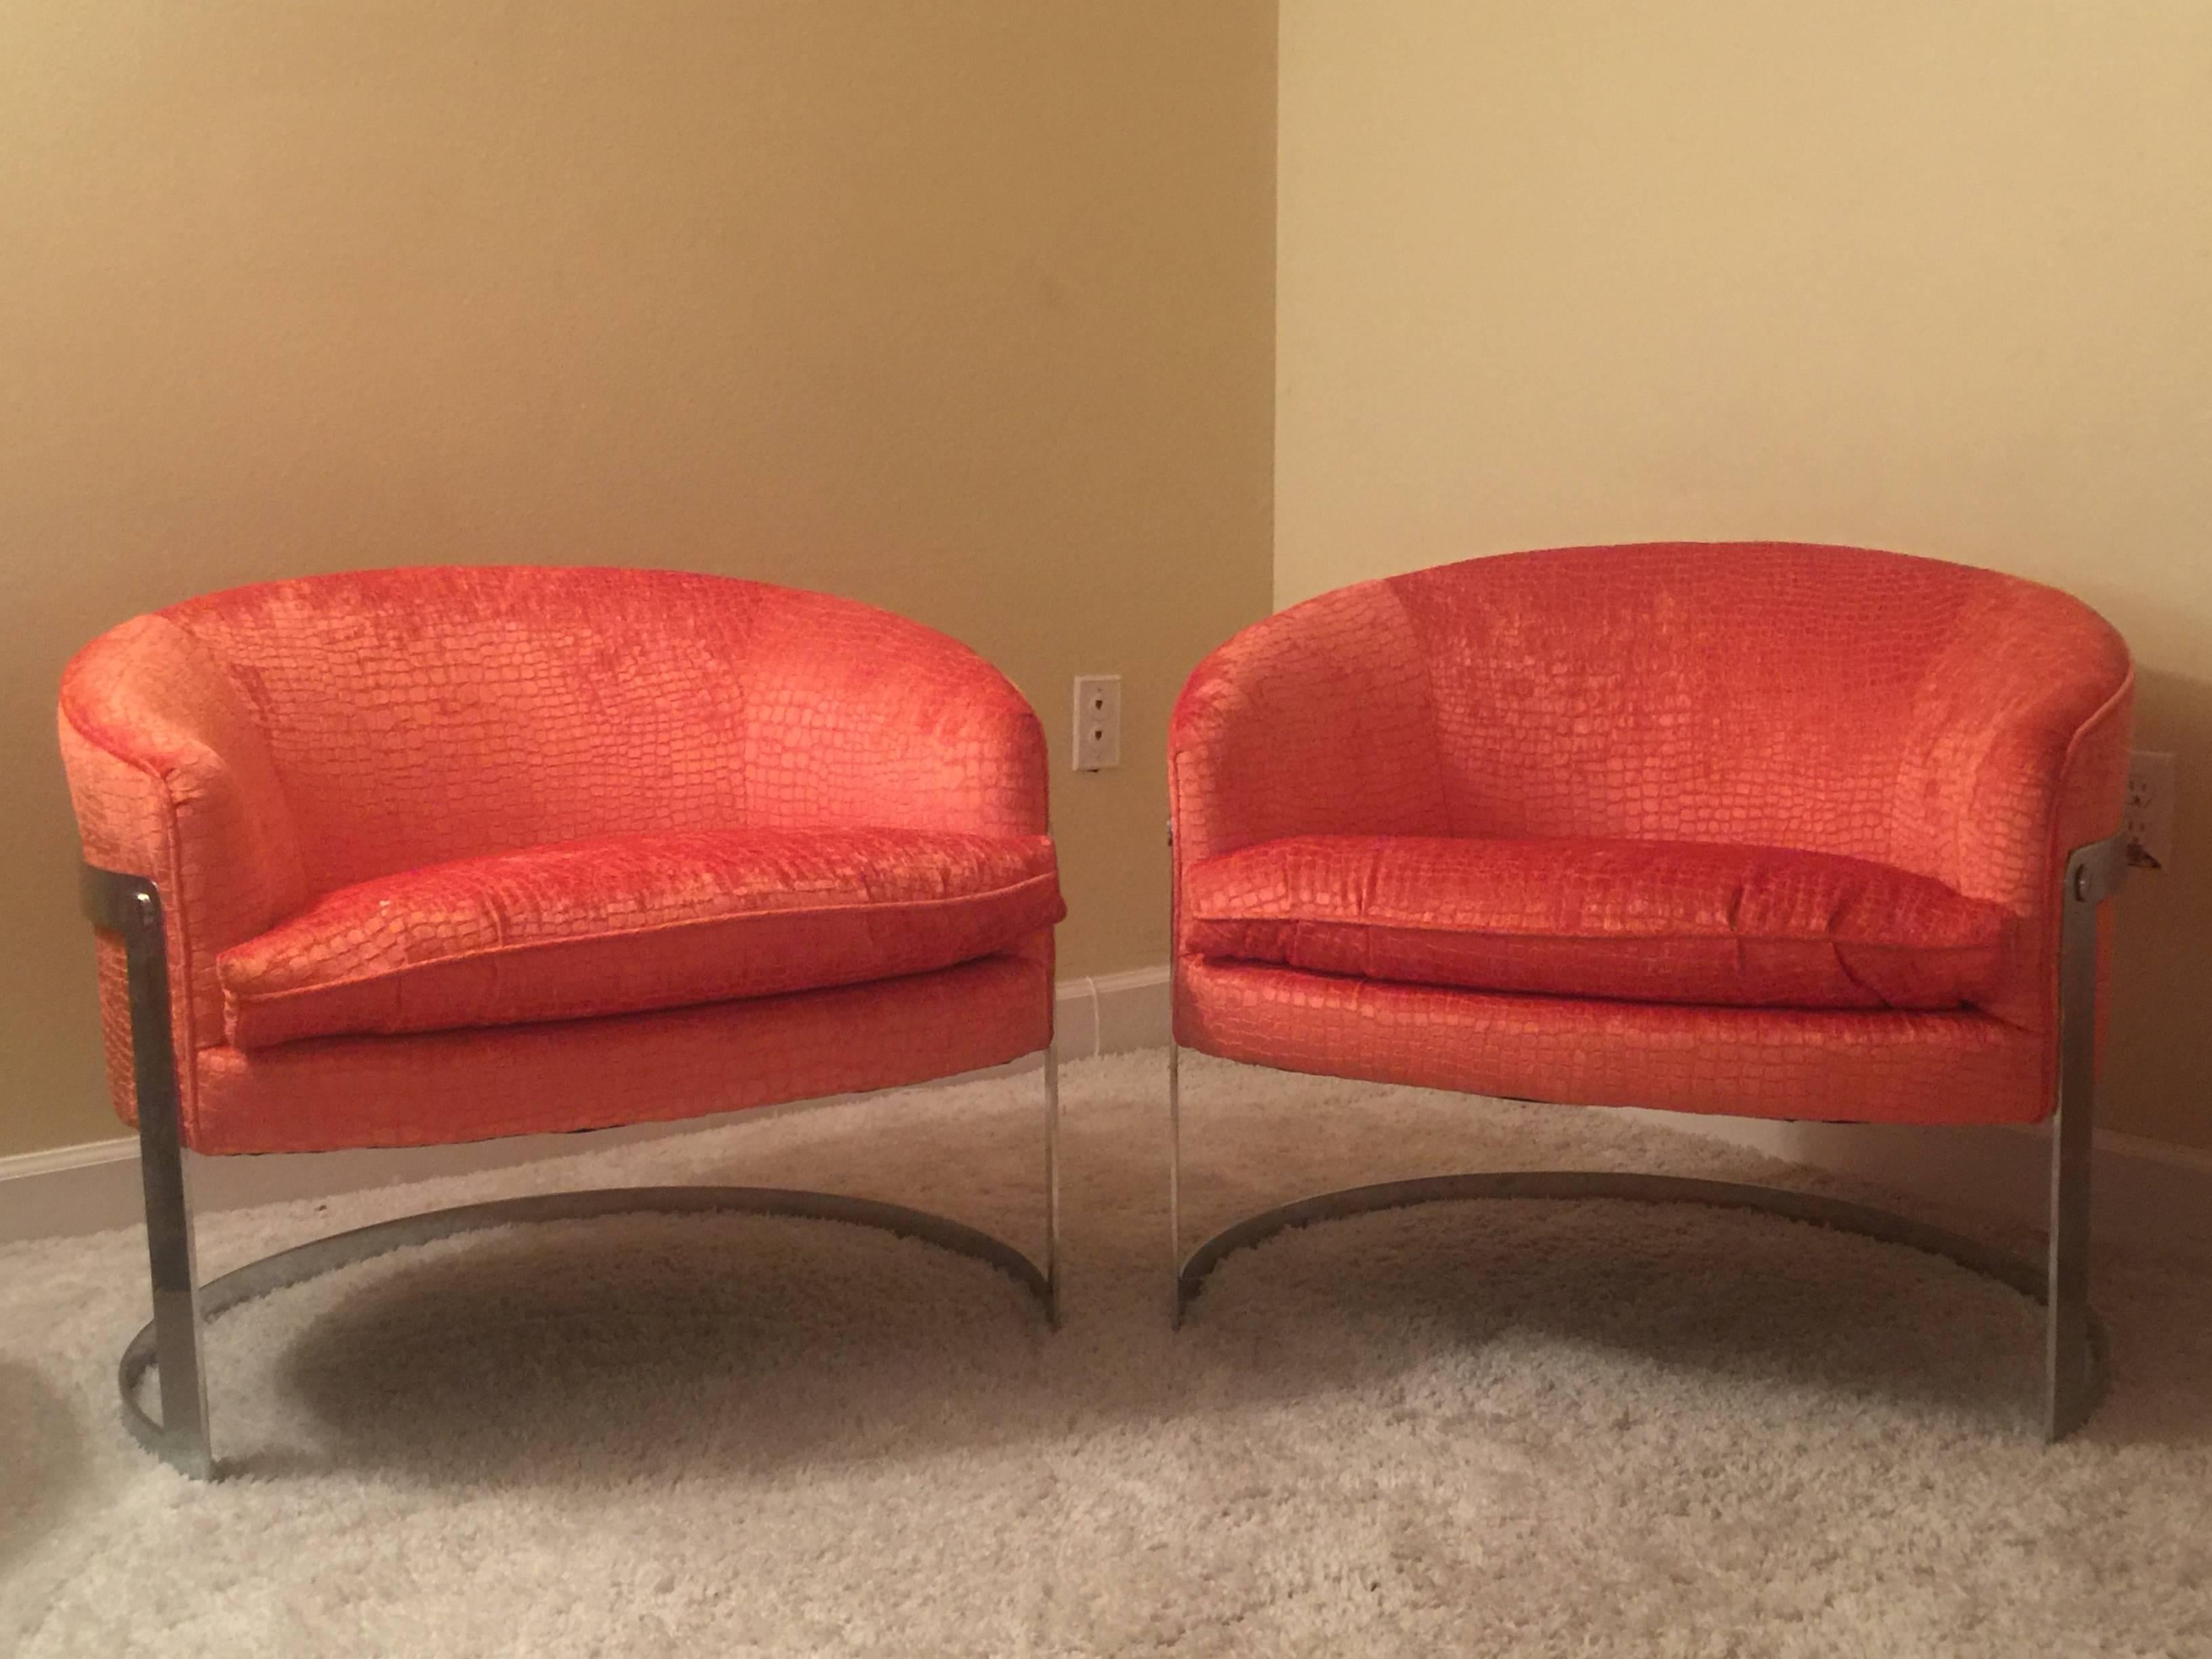 Completely restored seat and cushion, elegantly upholstered in a fresh orange coral faux alligator. 


History of Milo's early years and things that occurred in his early childhood would shape his destiny as a designer. Baughman moved with his